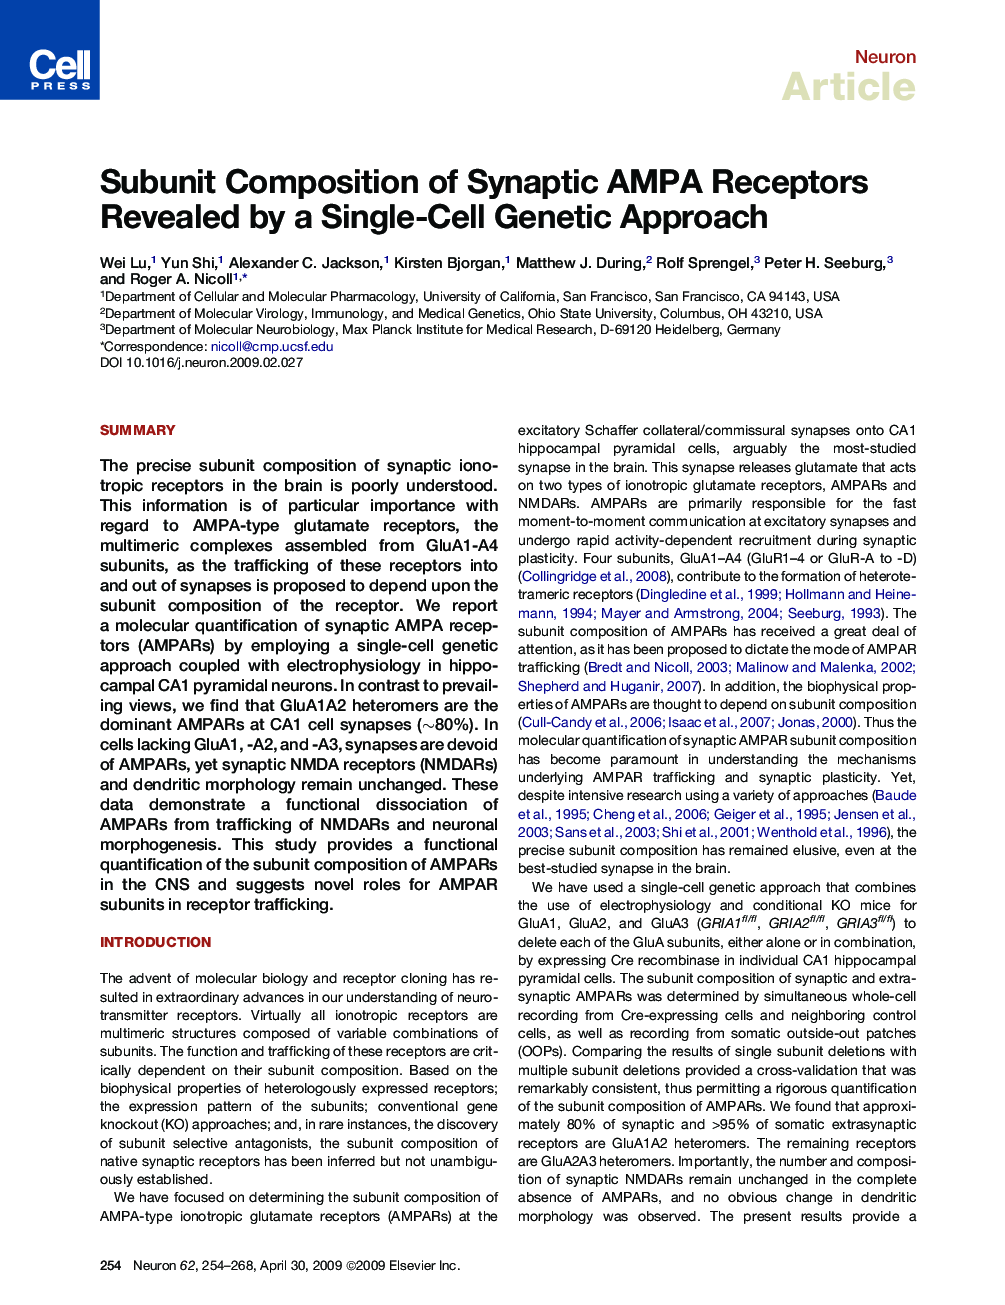 Subunit Composition of Synaptic AMPA Receptors Revealed by a Single-Cell Genetic Approach